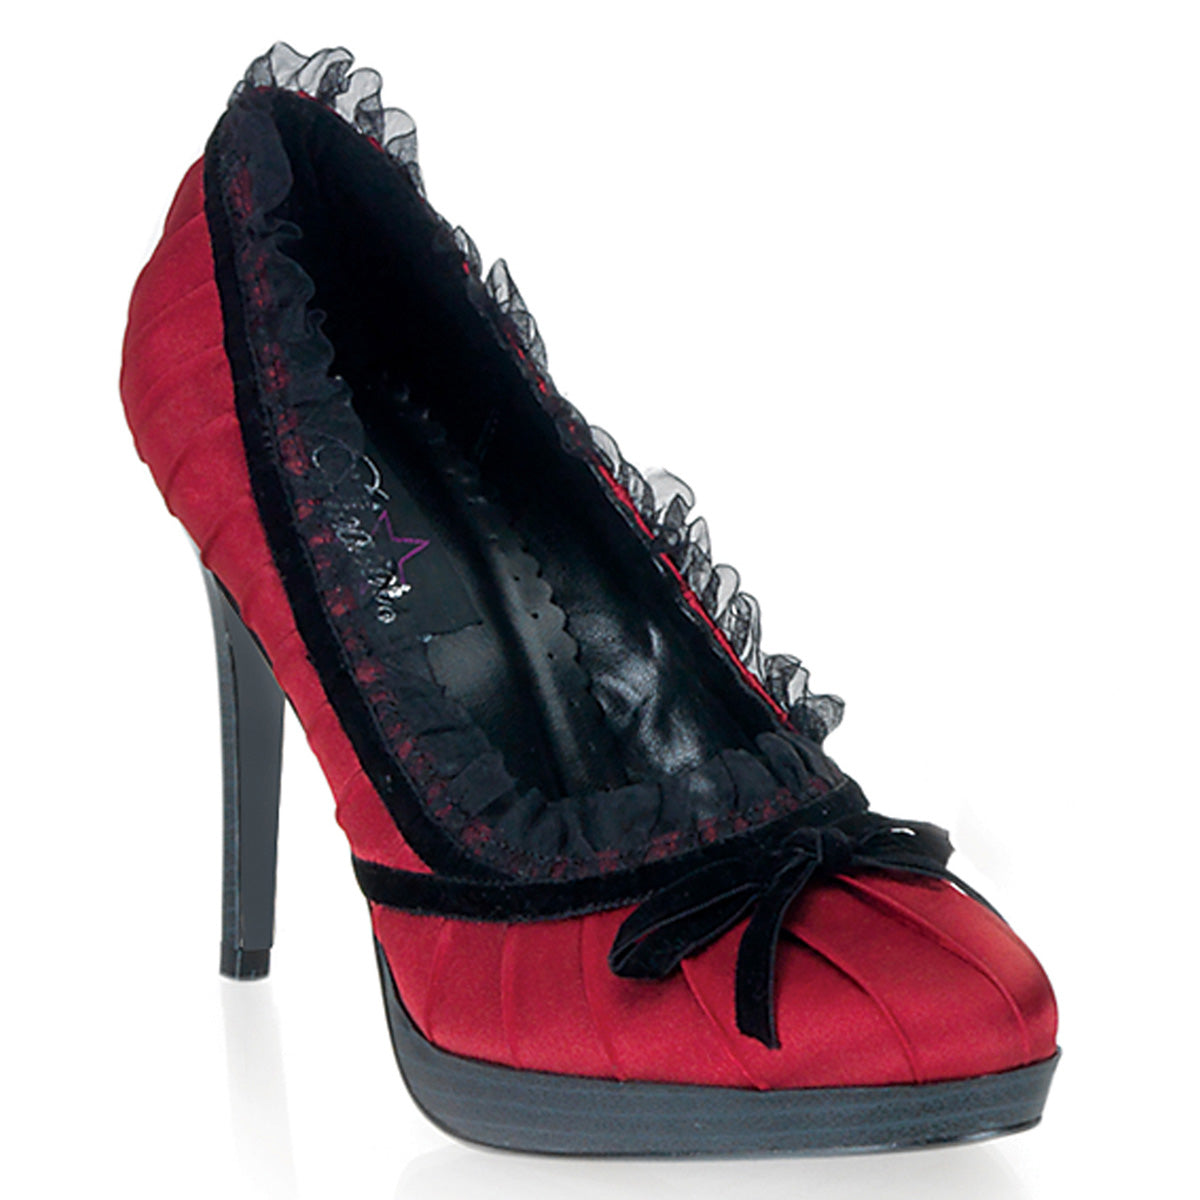 BLISS-38 Retro Glamour Pin Up Couture Platforms Red-Blk Satin